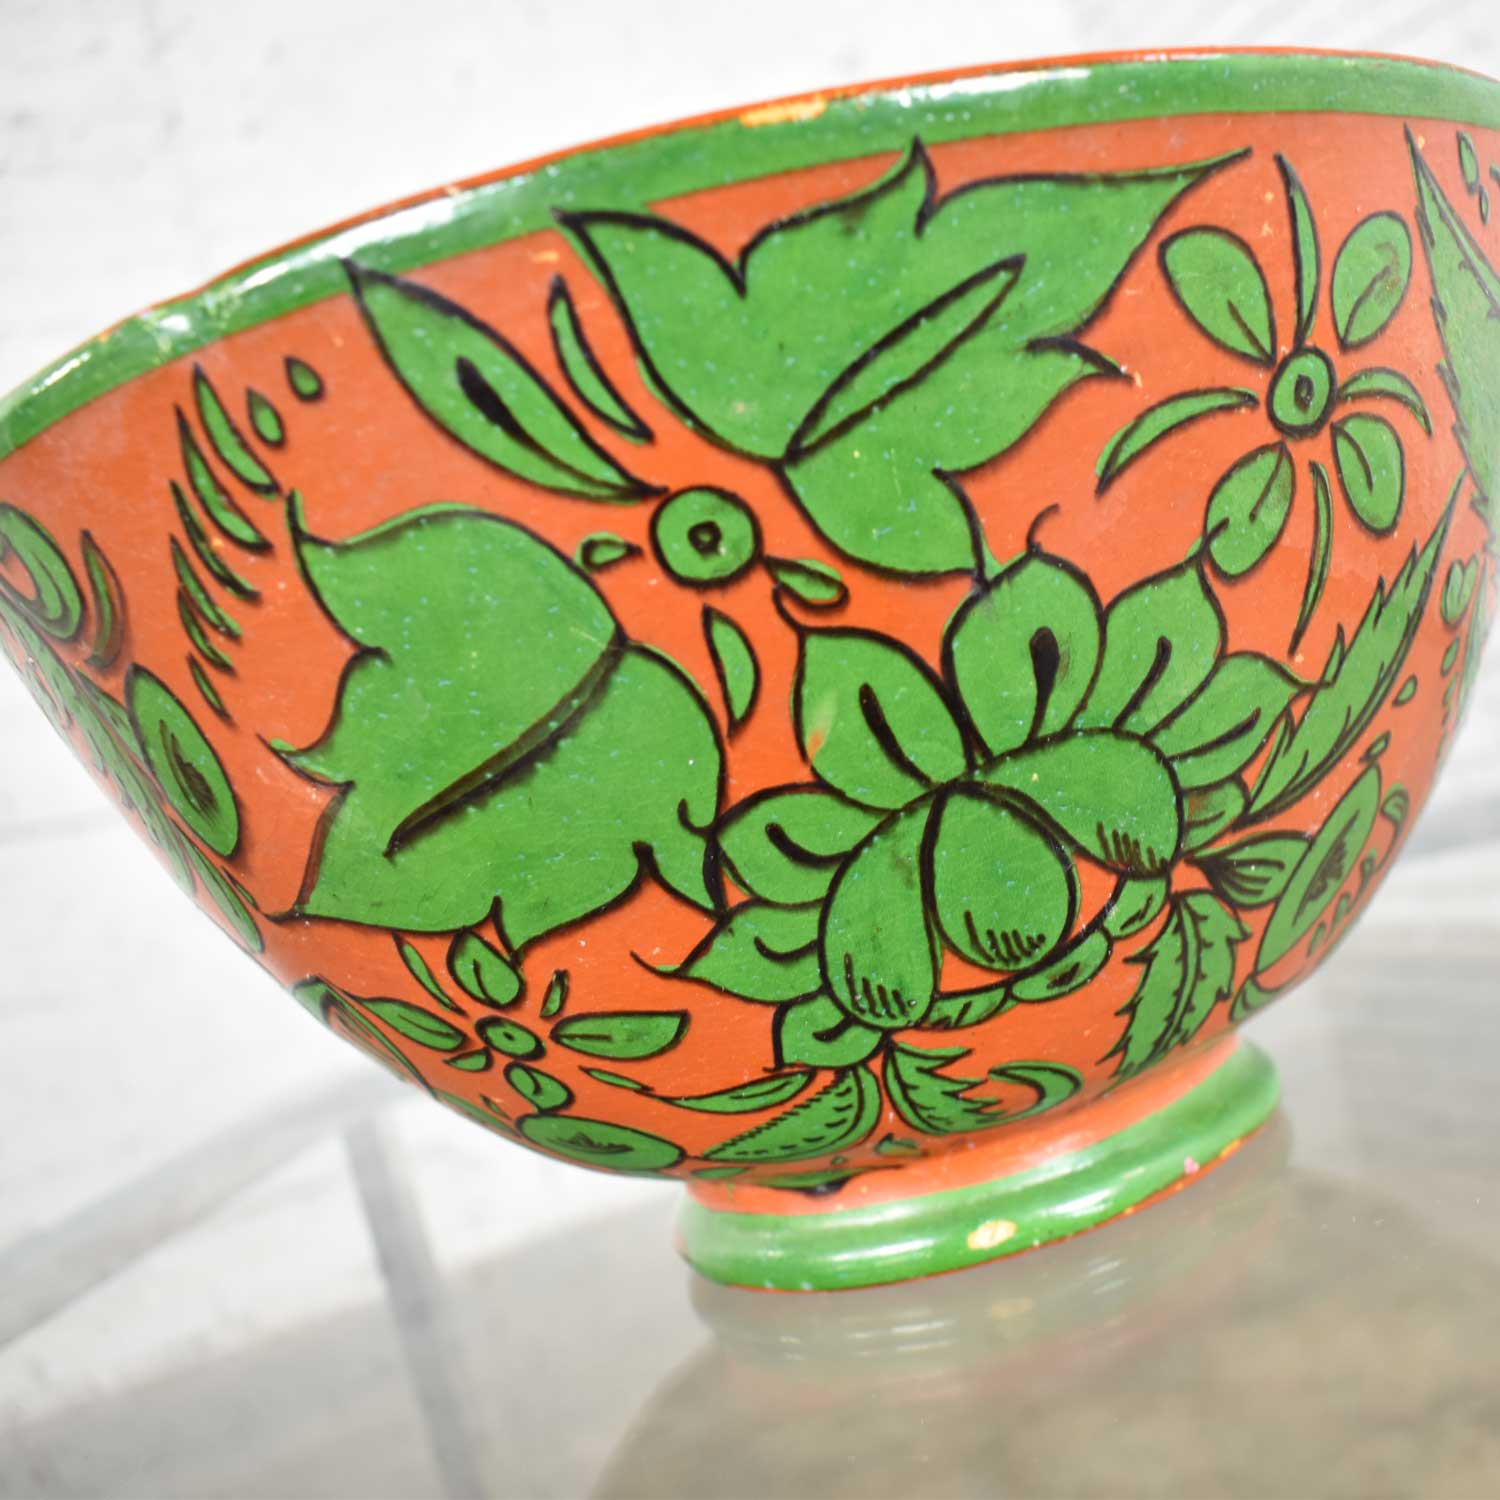 Tlaquepaque Mexican Pottery Bowl Large Fantasia Stylized Deer Green on Terracotta Mid-20th Century